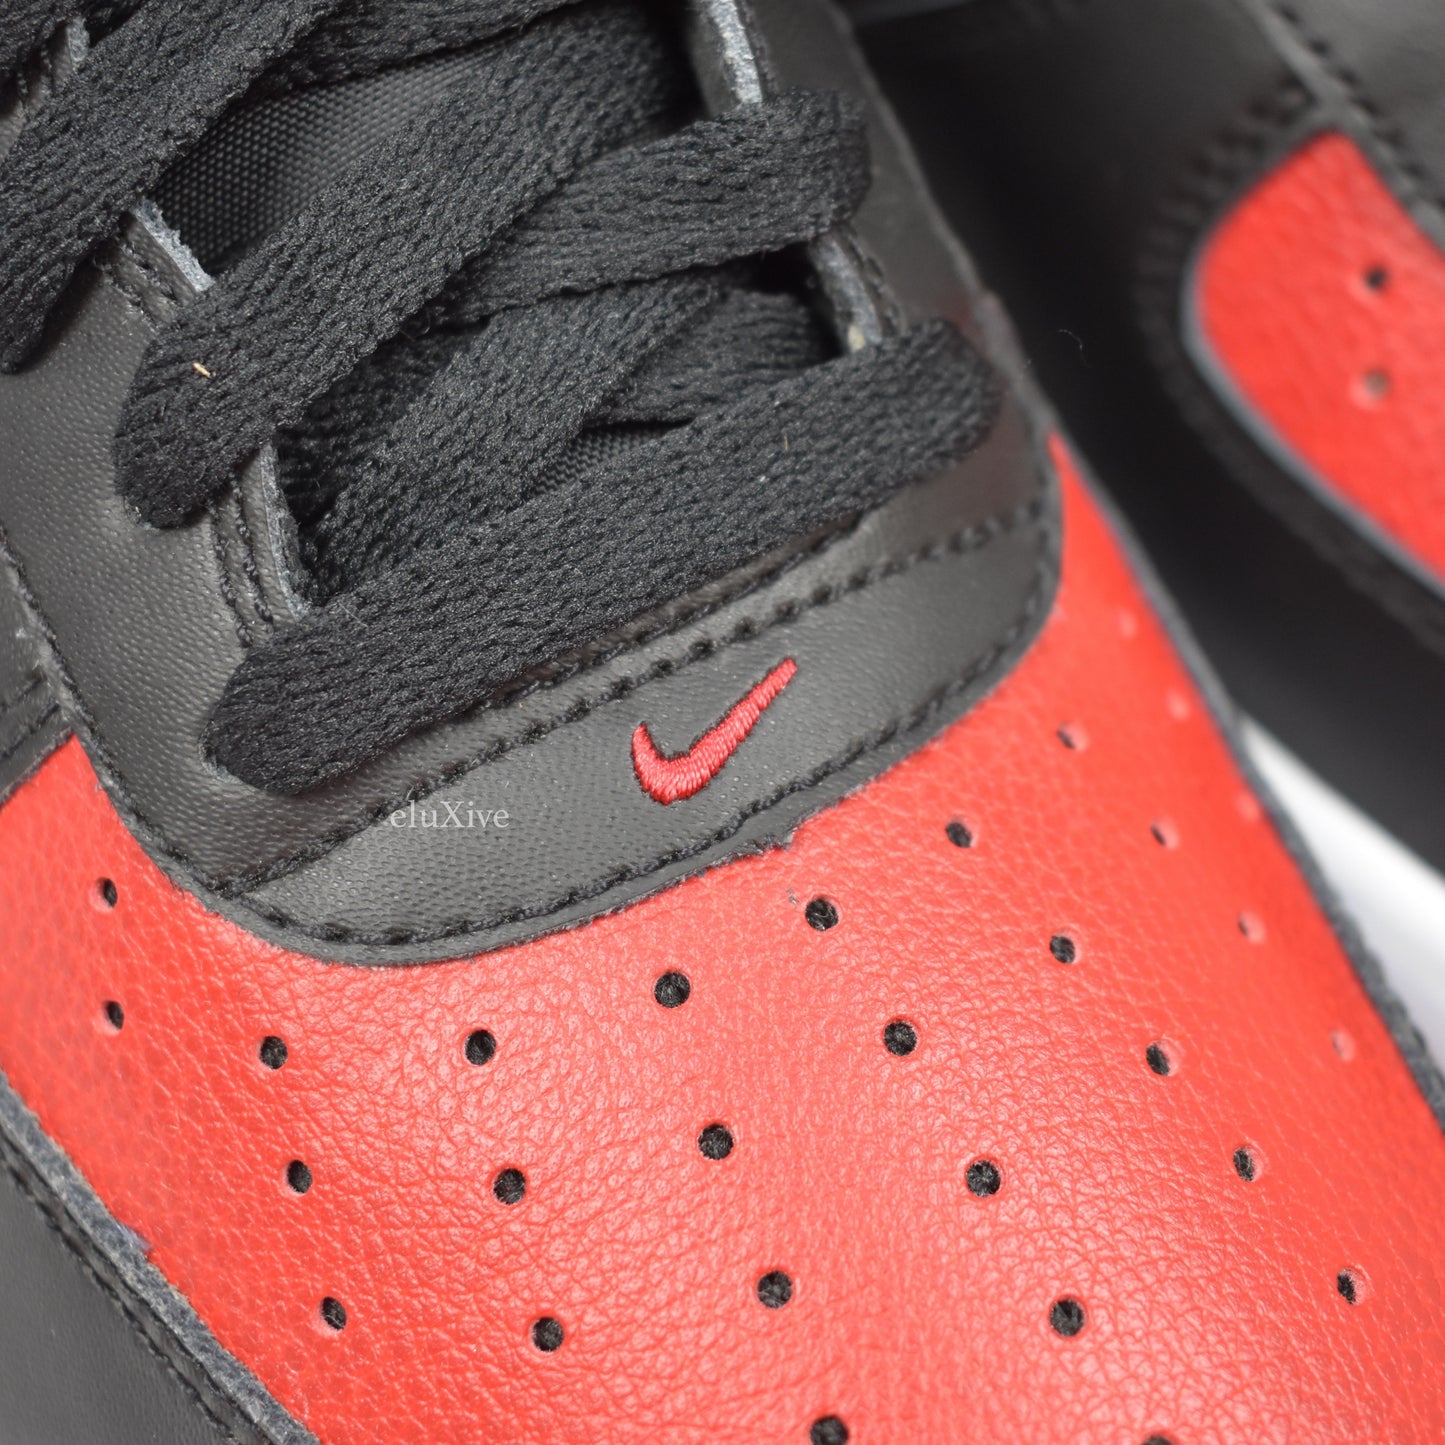 Nike - Air Force 1 Low 'Bred' (Black/Gym Red)